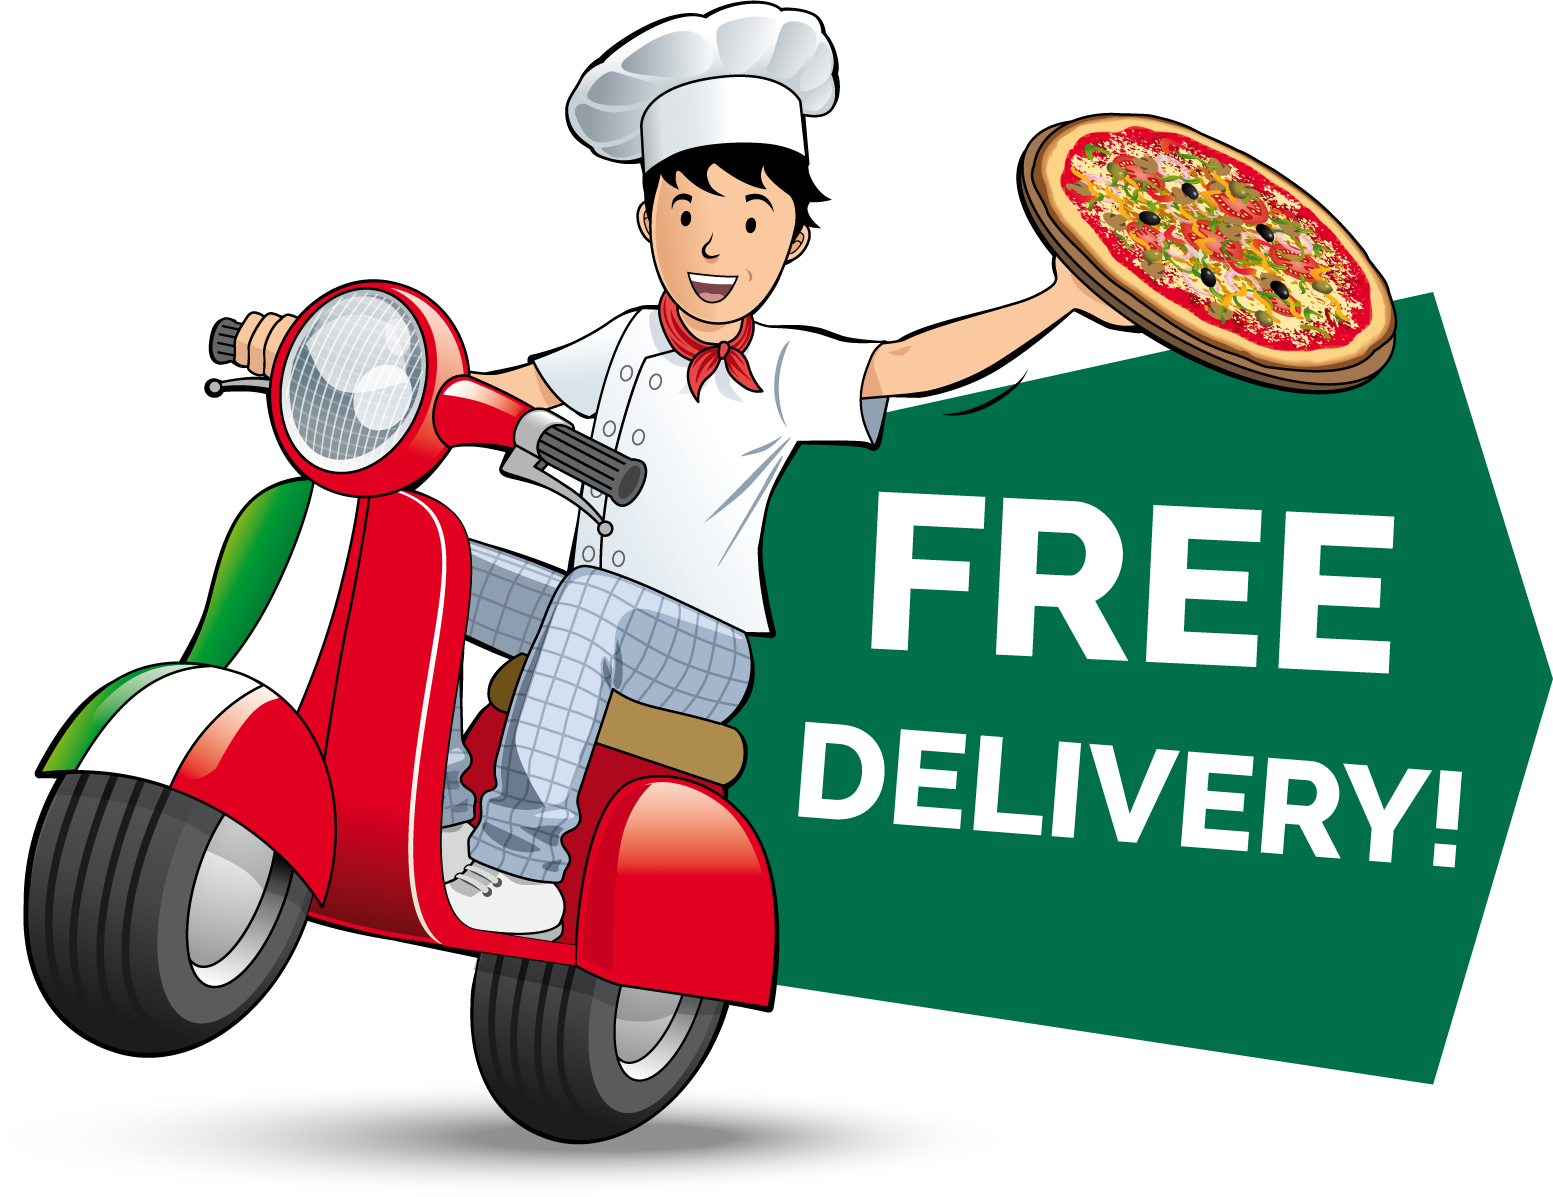 Free Delivery - Pizza (1553x1197)